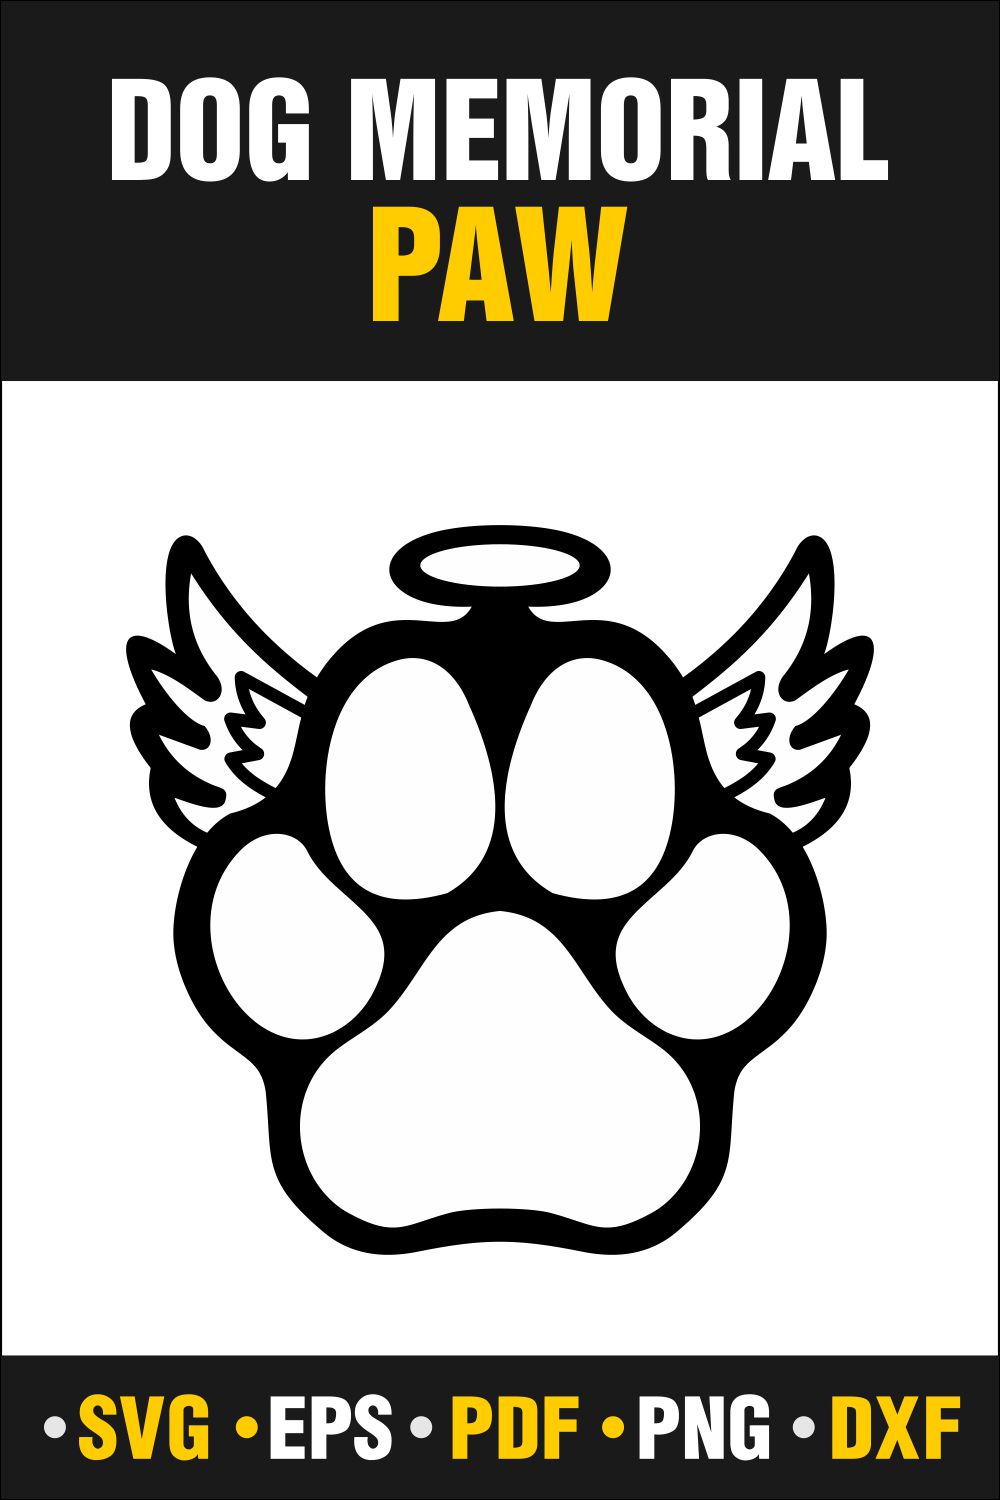 Dog memorial paw with angel wings.